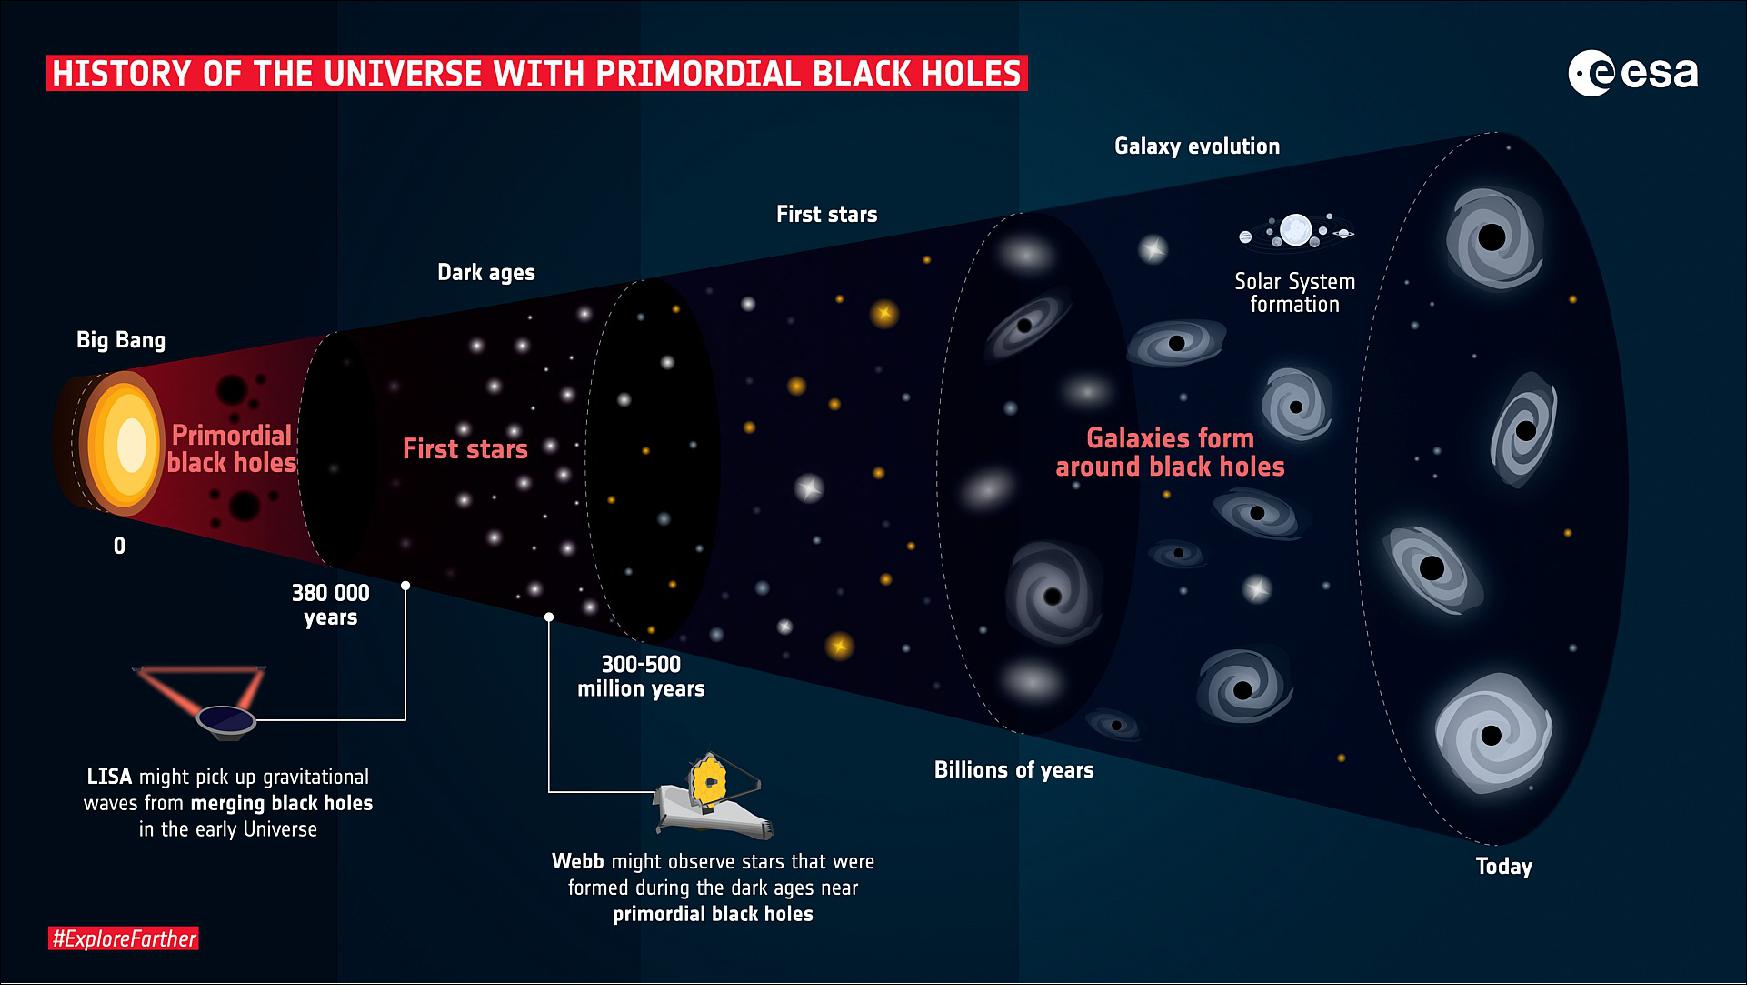 Figure 23: How did supermassive black holes form? What is dark matter? In an alternative model for how the Universe came to be, as compared to the ‘textbook' history of the Univers, a team of astronomers propose that both of these cosmic mysteries could be explained by so-called ‘primordial black holes'. - If most of the black holes formed immediately after the Big Bang, they could have started merging in the early Universe, forming more and more massive black holes over time. - According to this model, the Universe would be filled with black holes all over. Stars would start to form around these clumps of ‘dark matter', creating solar systems and galaxies over billions of years. If the first stars indeed formed around primordial black holes, they would exist earlier in the Universe than is expected by the ‘standard' model. Primordial black holes could then be the seeds from which all black holes form, including the one at the centre of our own Milky Way galaxy. - ESA's future missions Webb, Euclid and LISA mission may be able to shed light on the mystery (image credit: ESA)